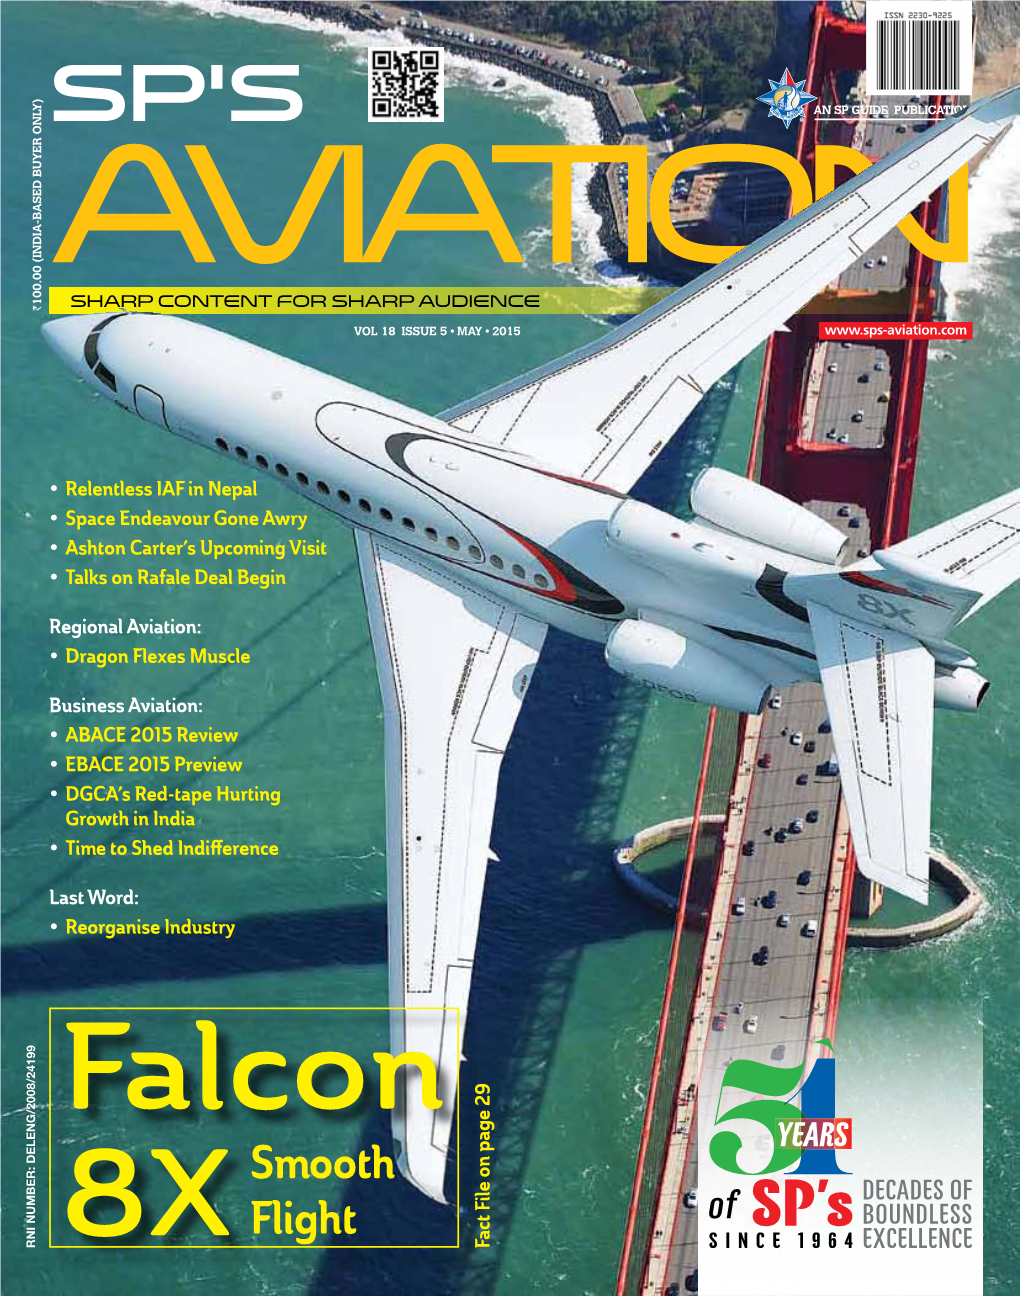 SP's Aviation Cover 5-2015 Final.Indd 1 14/05/15 6:17 PM